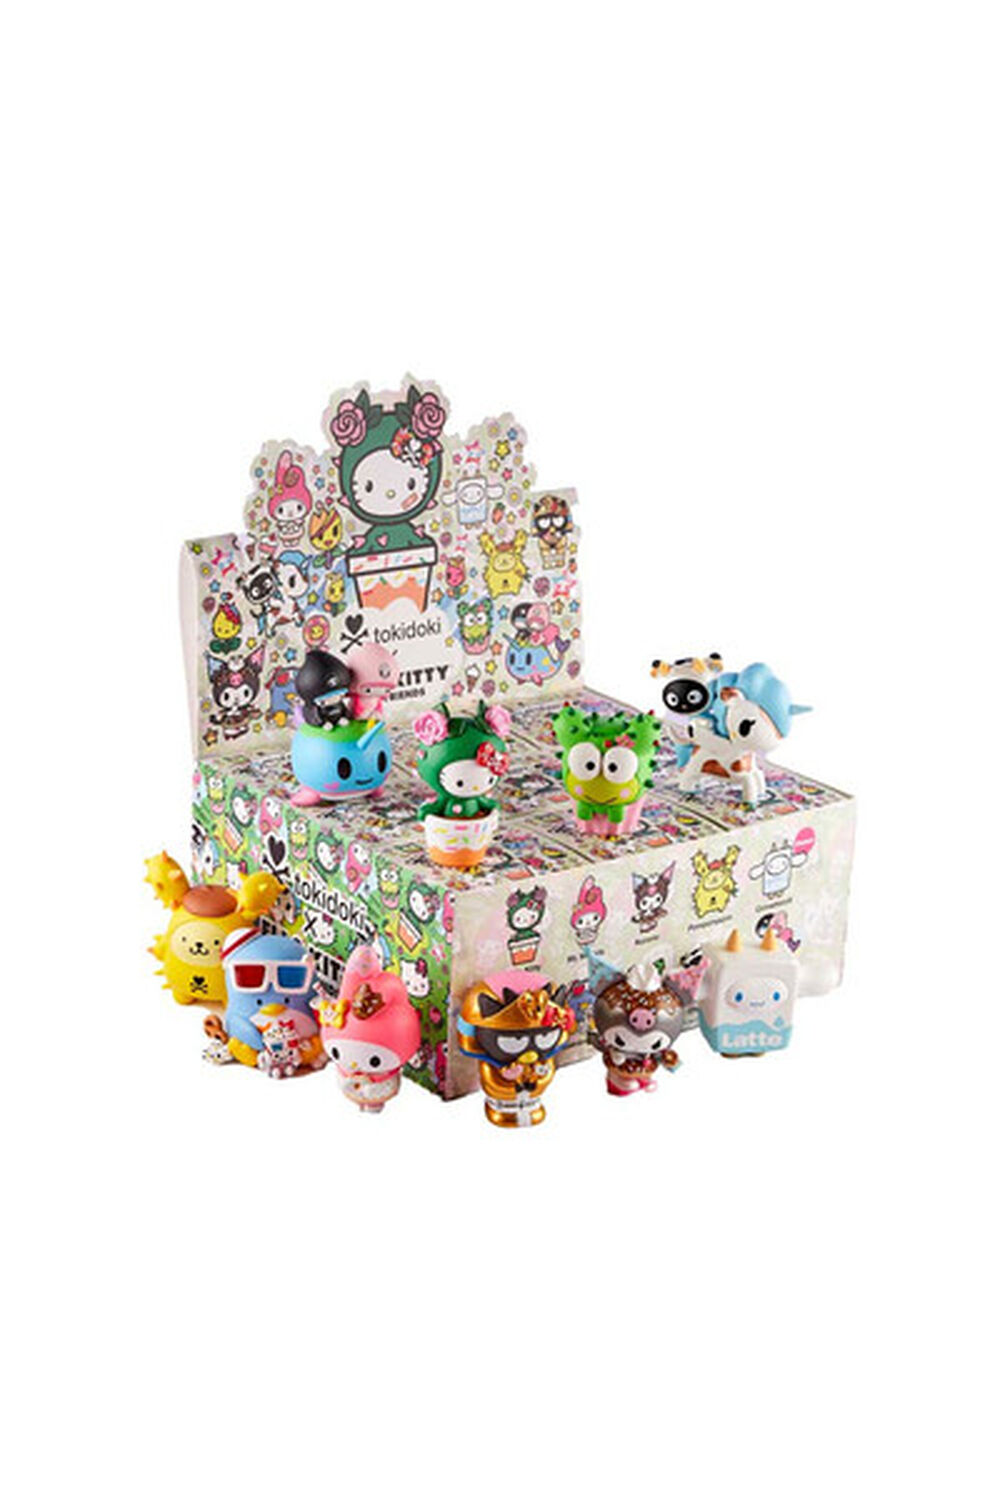 Forever 21 Releases Hello Kitty and Friends Holiday Capsule Collection